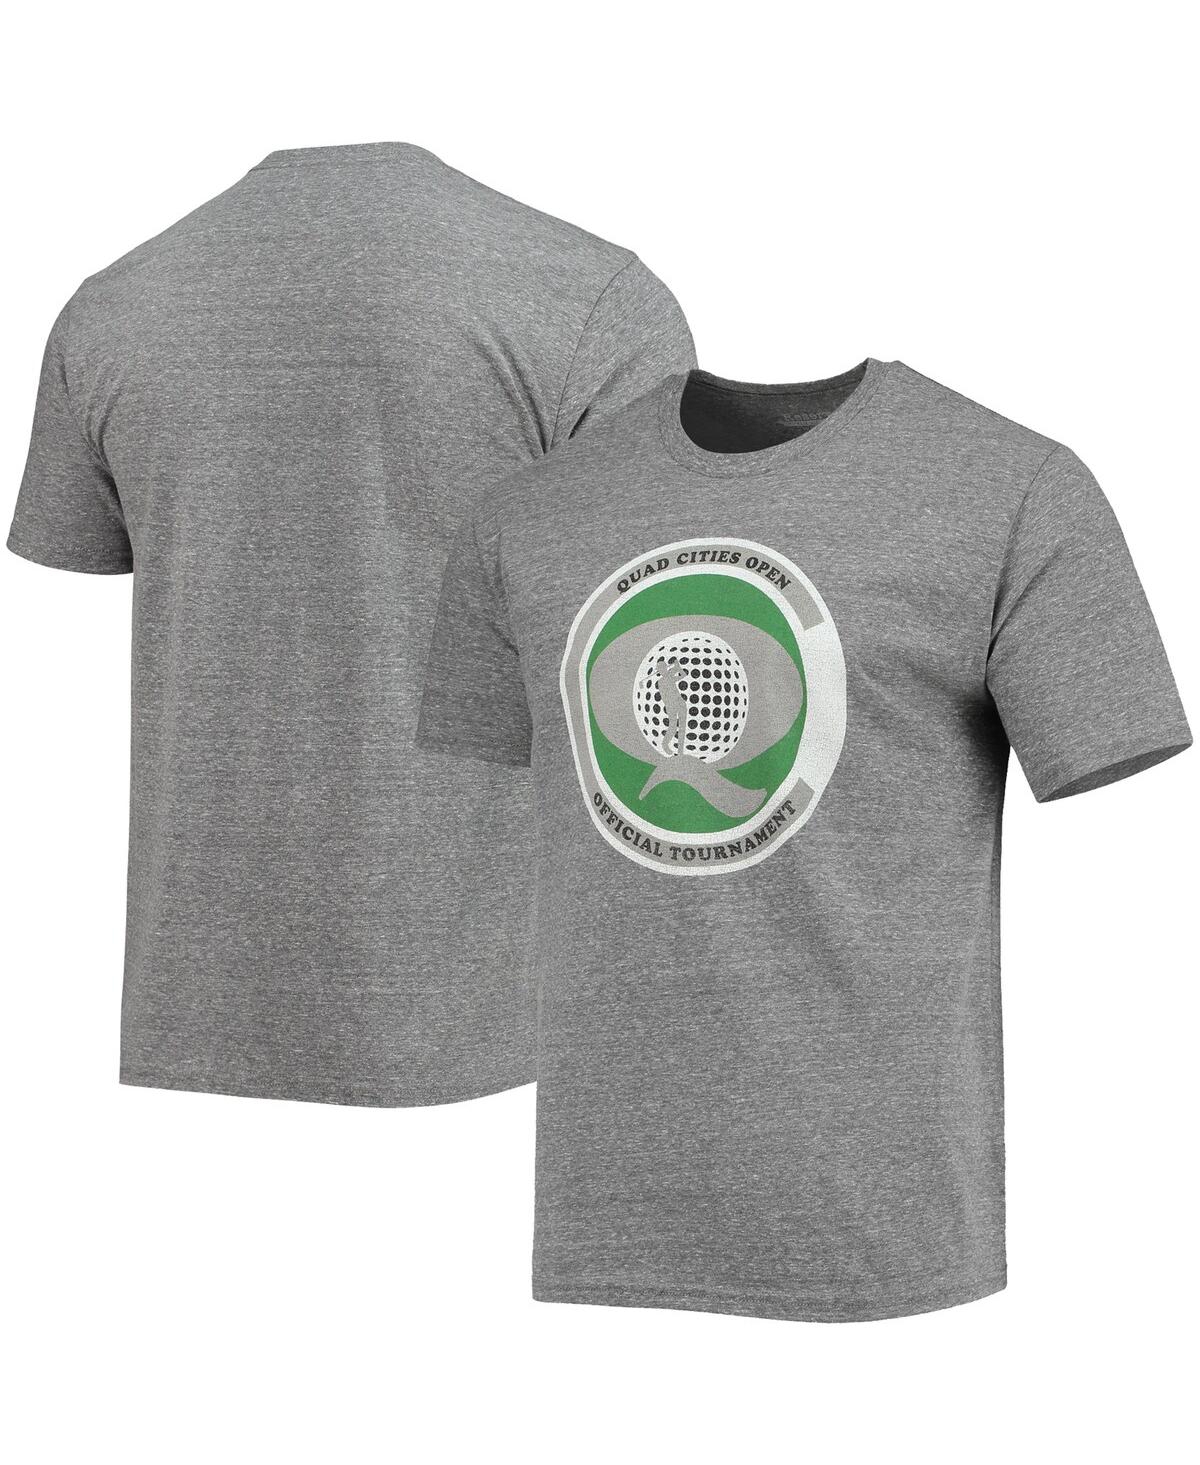 Shop Blue 84 Men's  Heathered Gray John Deere Classic Heritage Collection Quad Cities Open Tri-blend T-shi